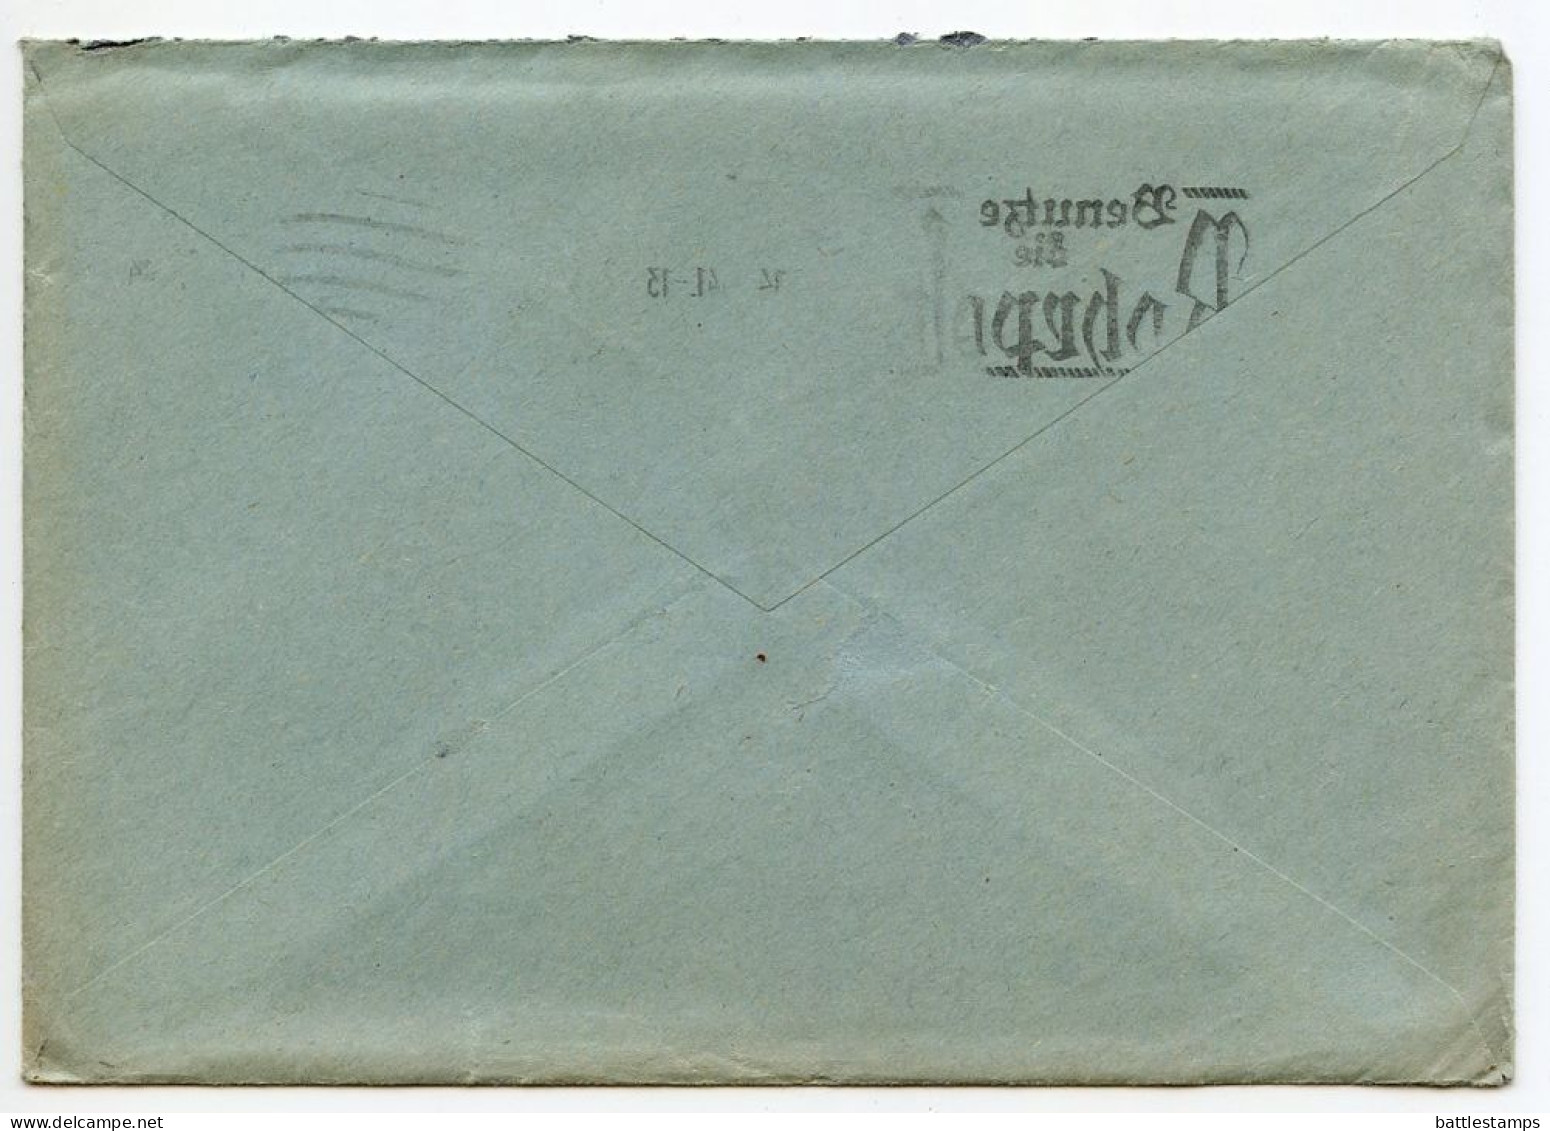 Germany 1941 Cover & Multiple Letters; Berlin-Charlottenburg To Schiplage; 12pf. Hindenburg; Rohrpost Slogan Cancel - Covers & Documents